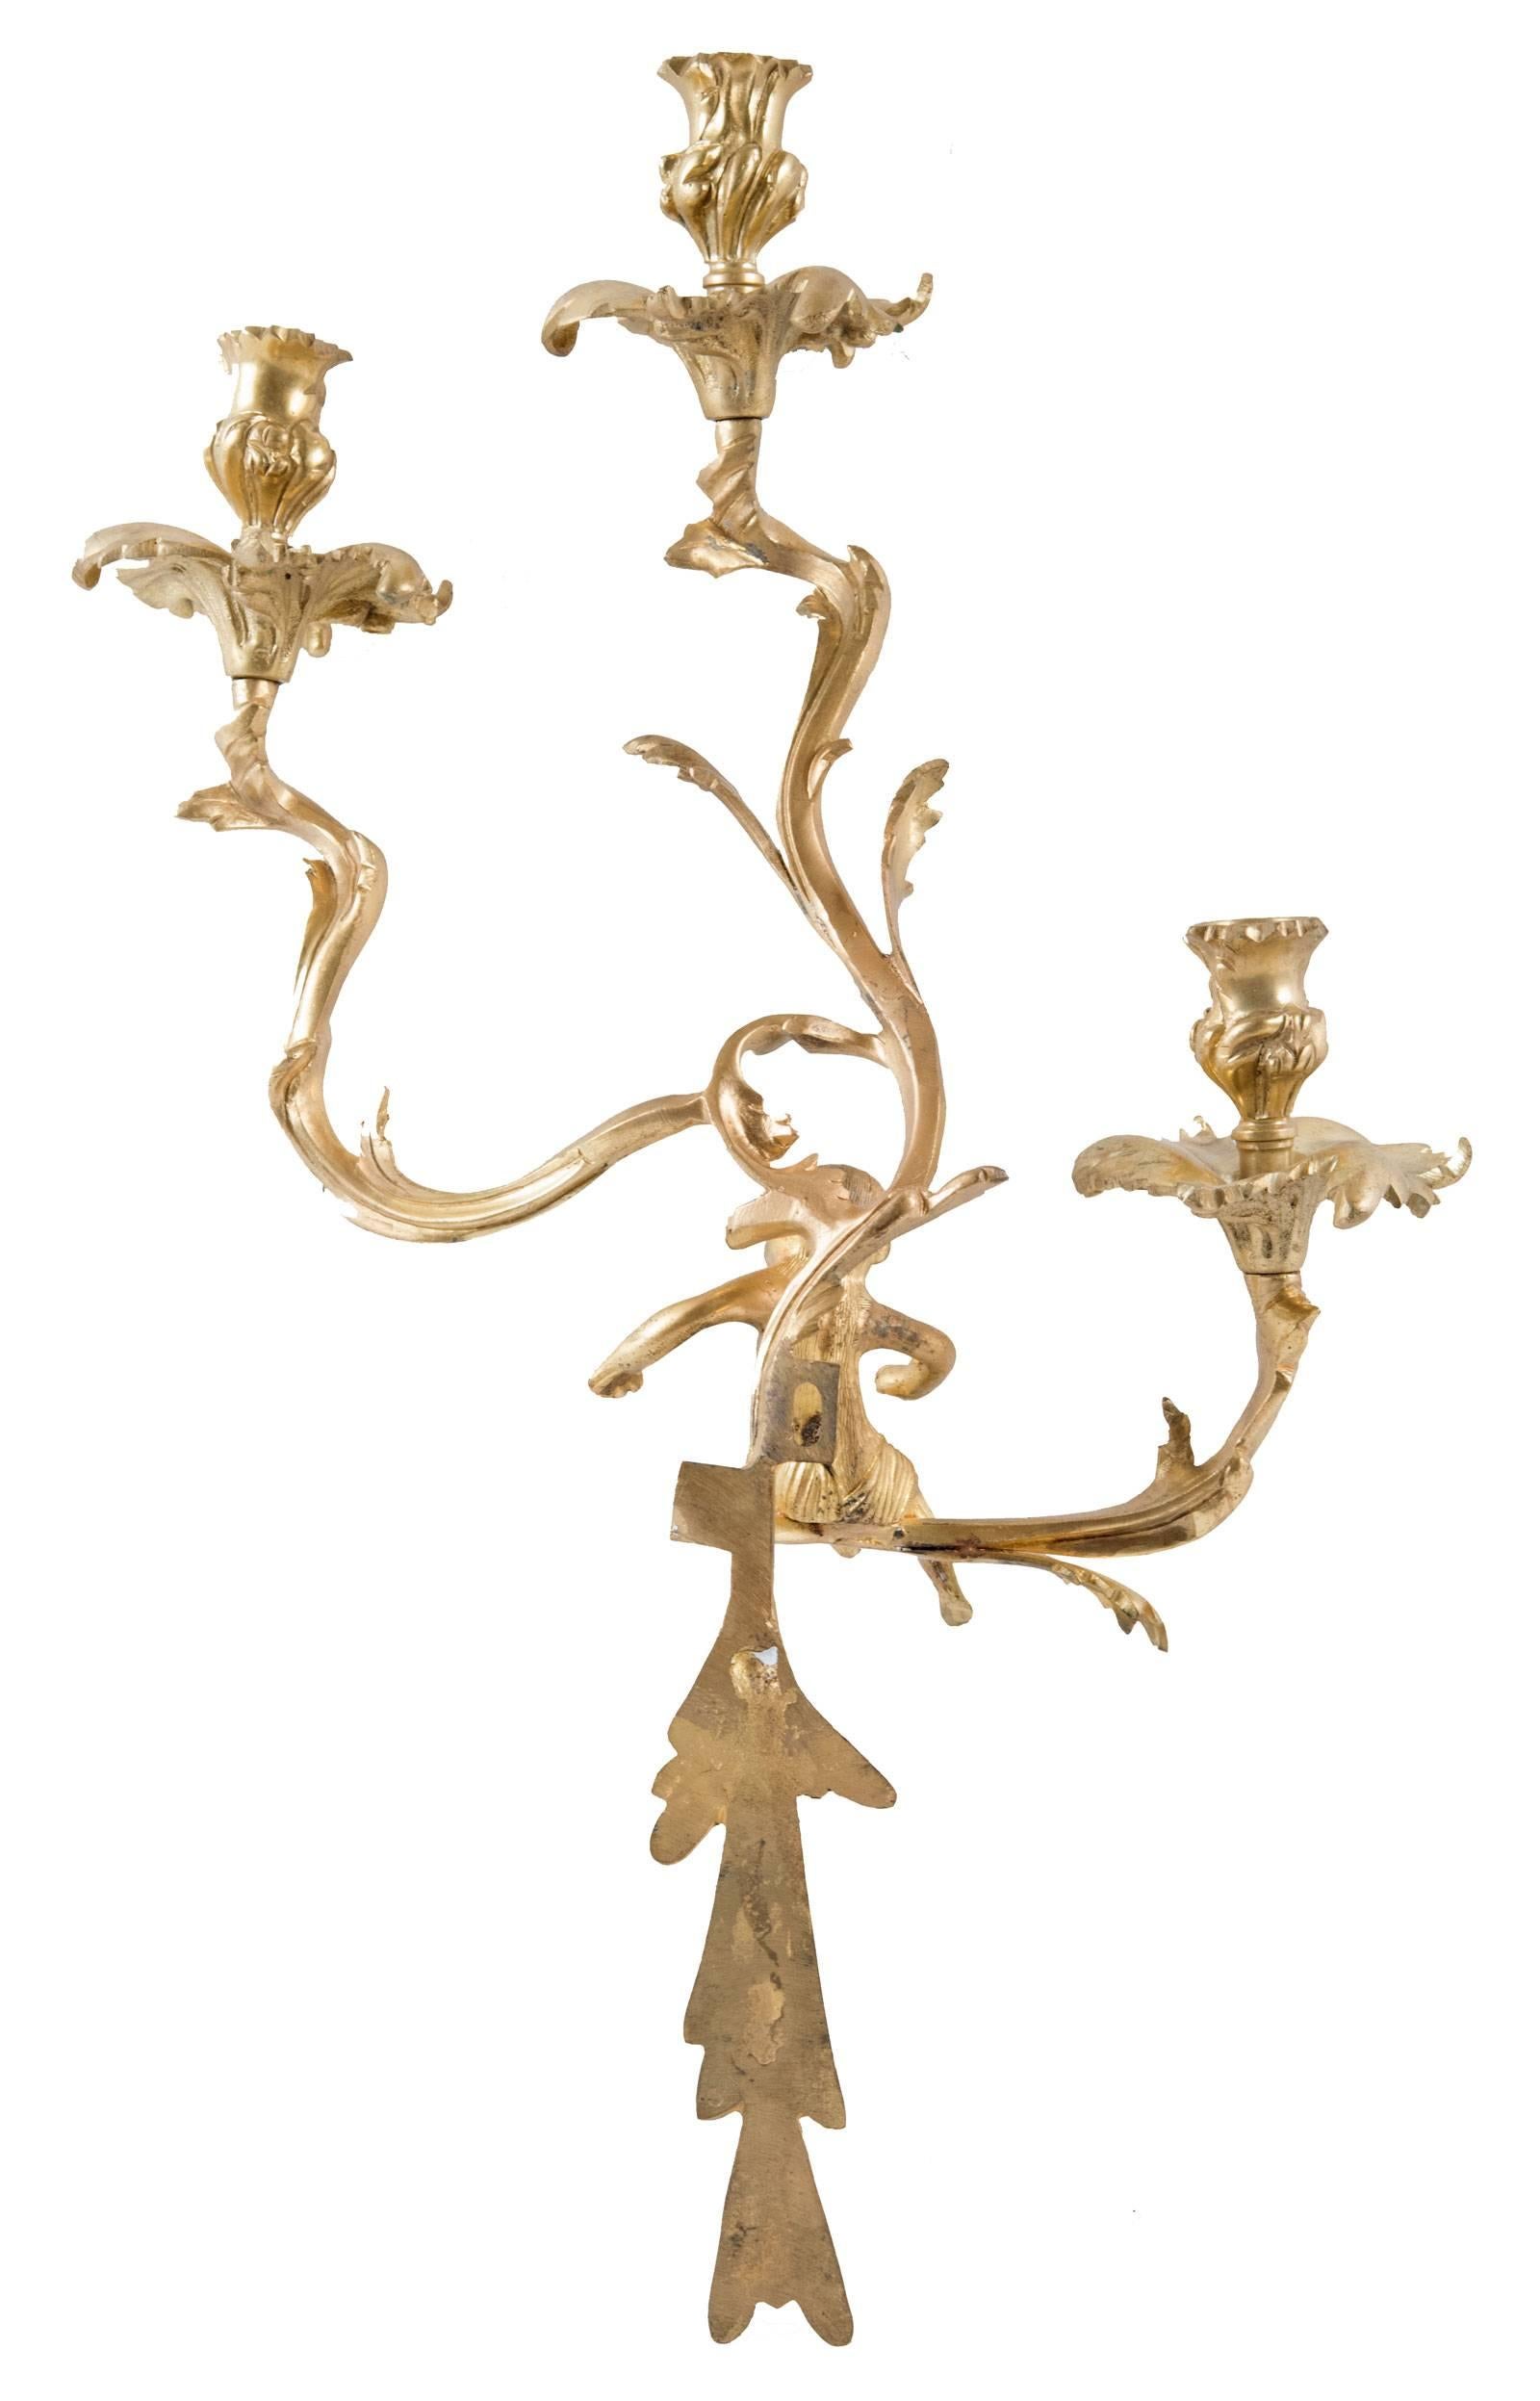 Pair of Gilt Louis XV-Style Wall Sconces In Good Condition For Sale In Salt Lake City, UT